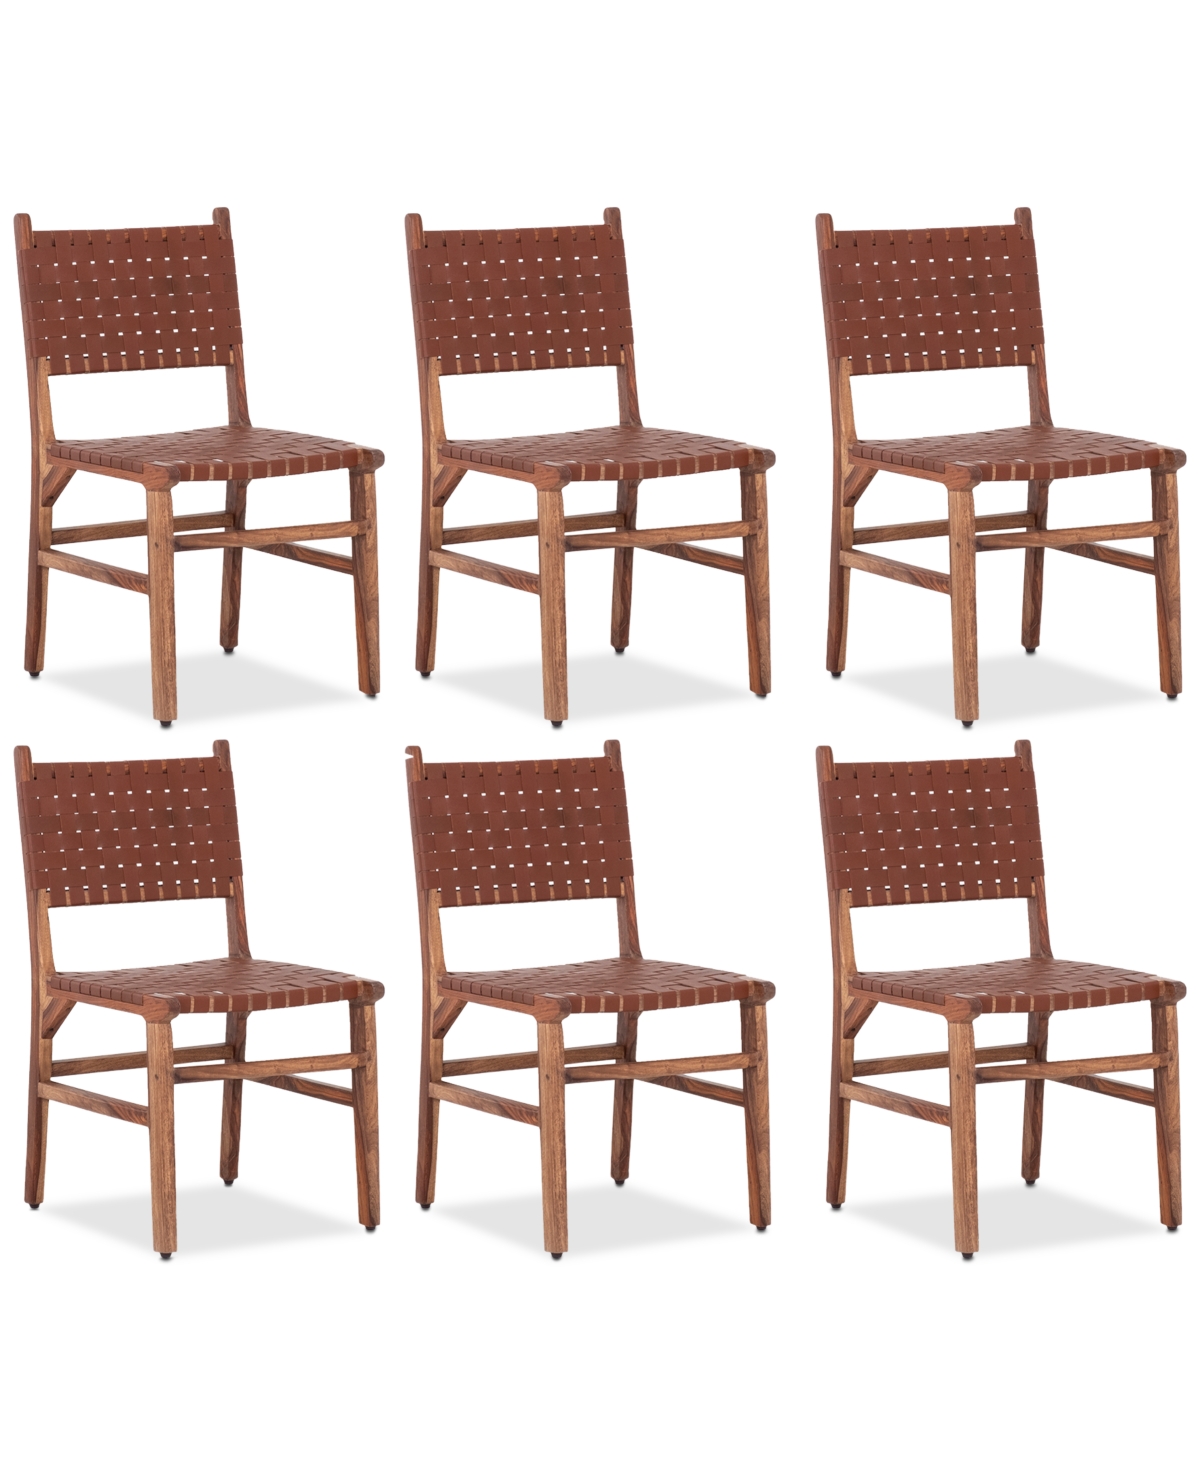 Furniture Emmilyn Brown Dining Chair 6pc Set